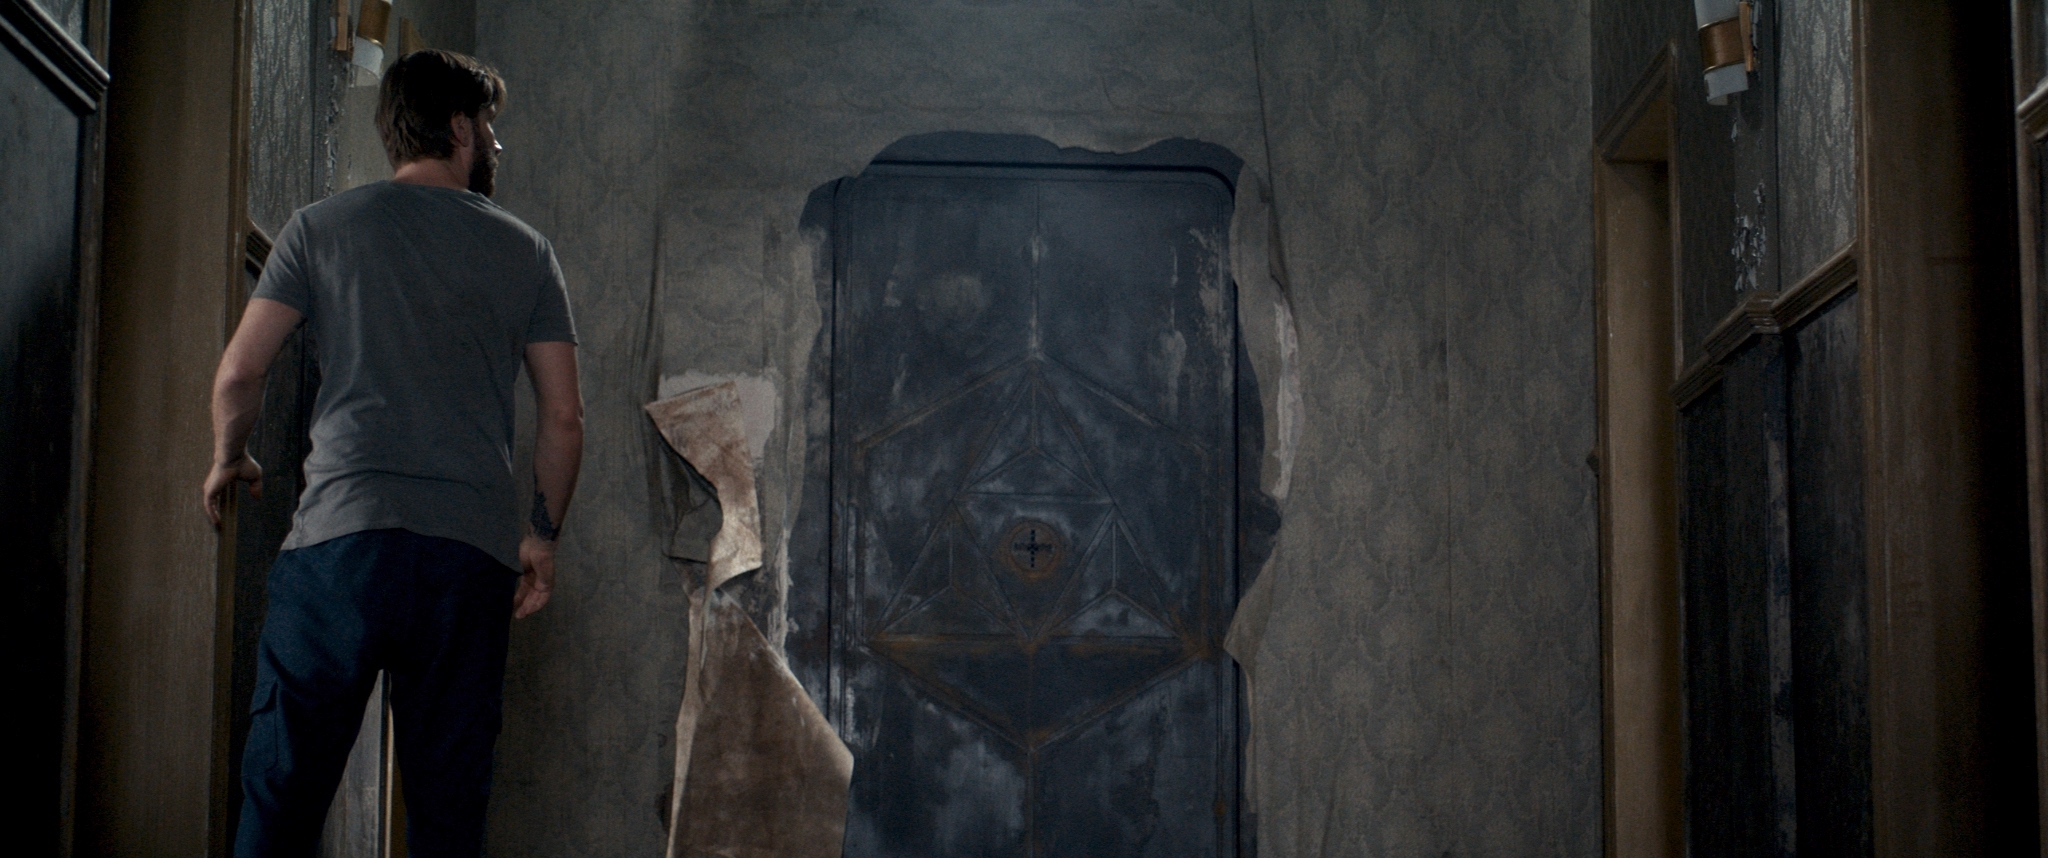 Kevin Janssens looks at a mysterious, ominous metal door previously covered by wallpaper in The Room.